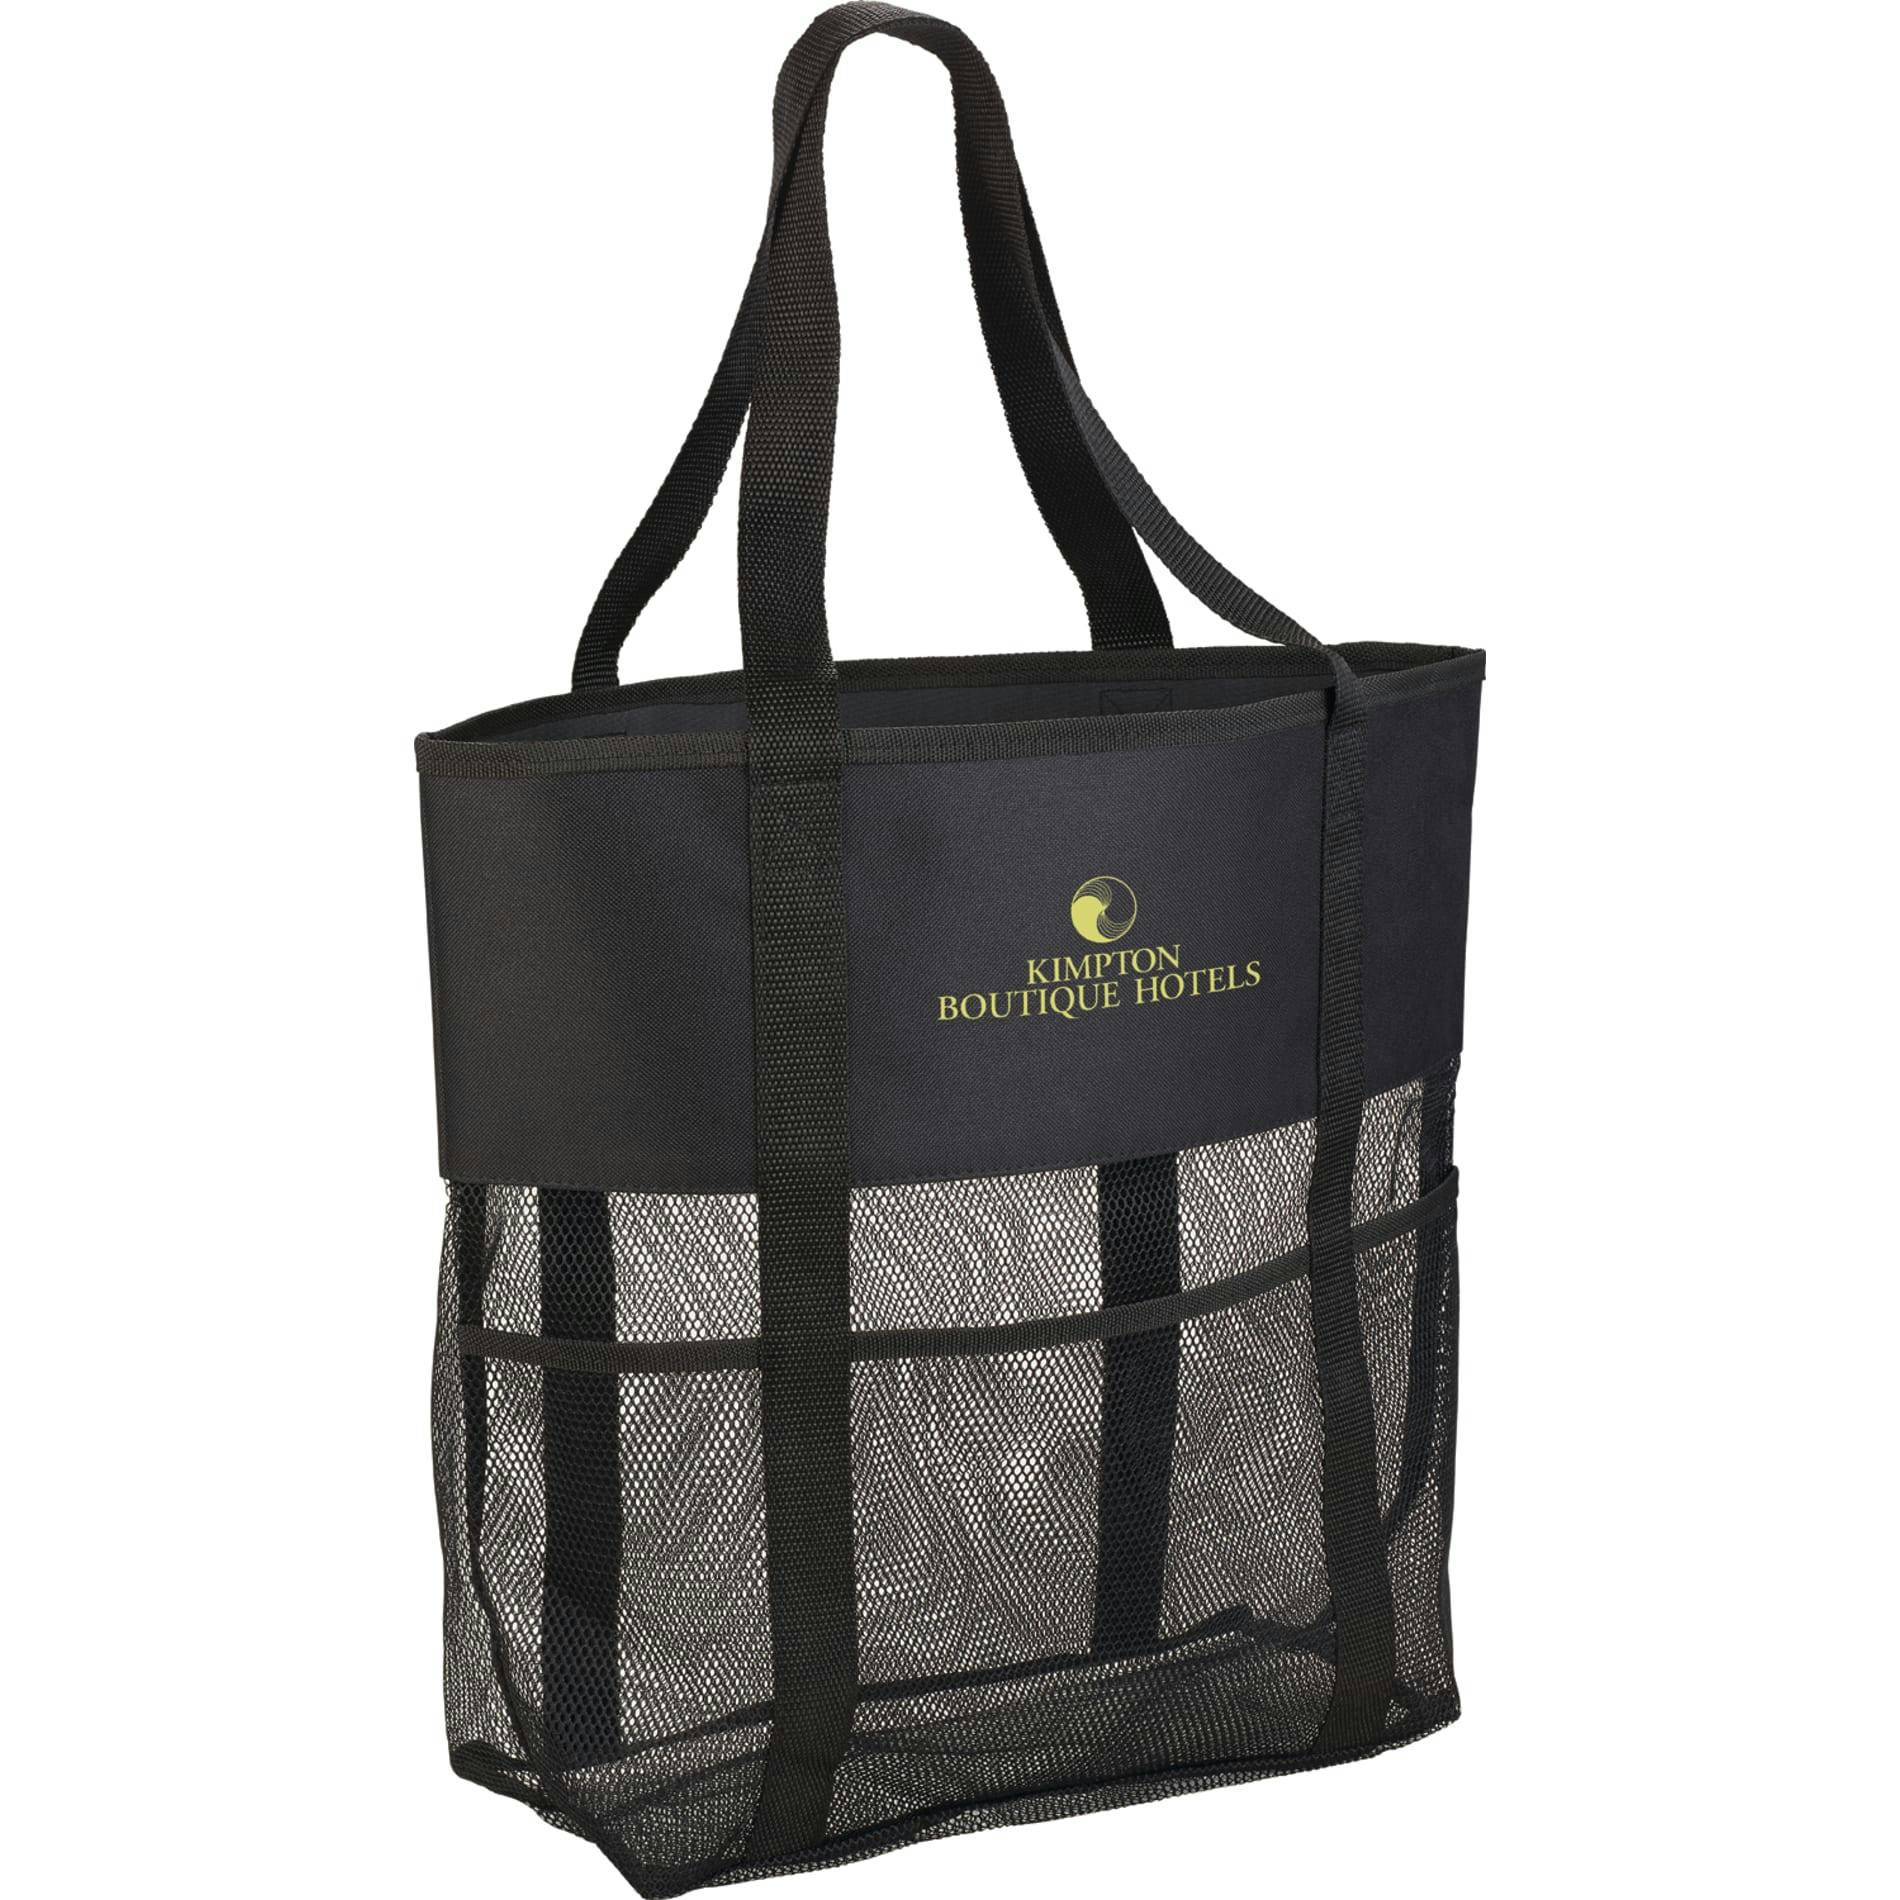 Utility Beach Tote - additional Image 2